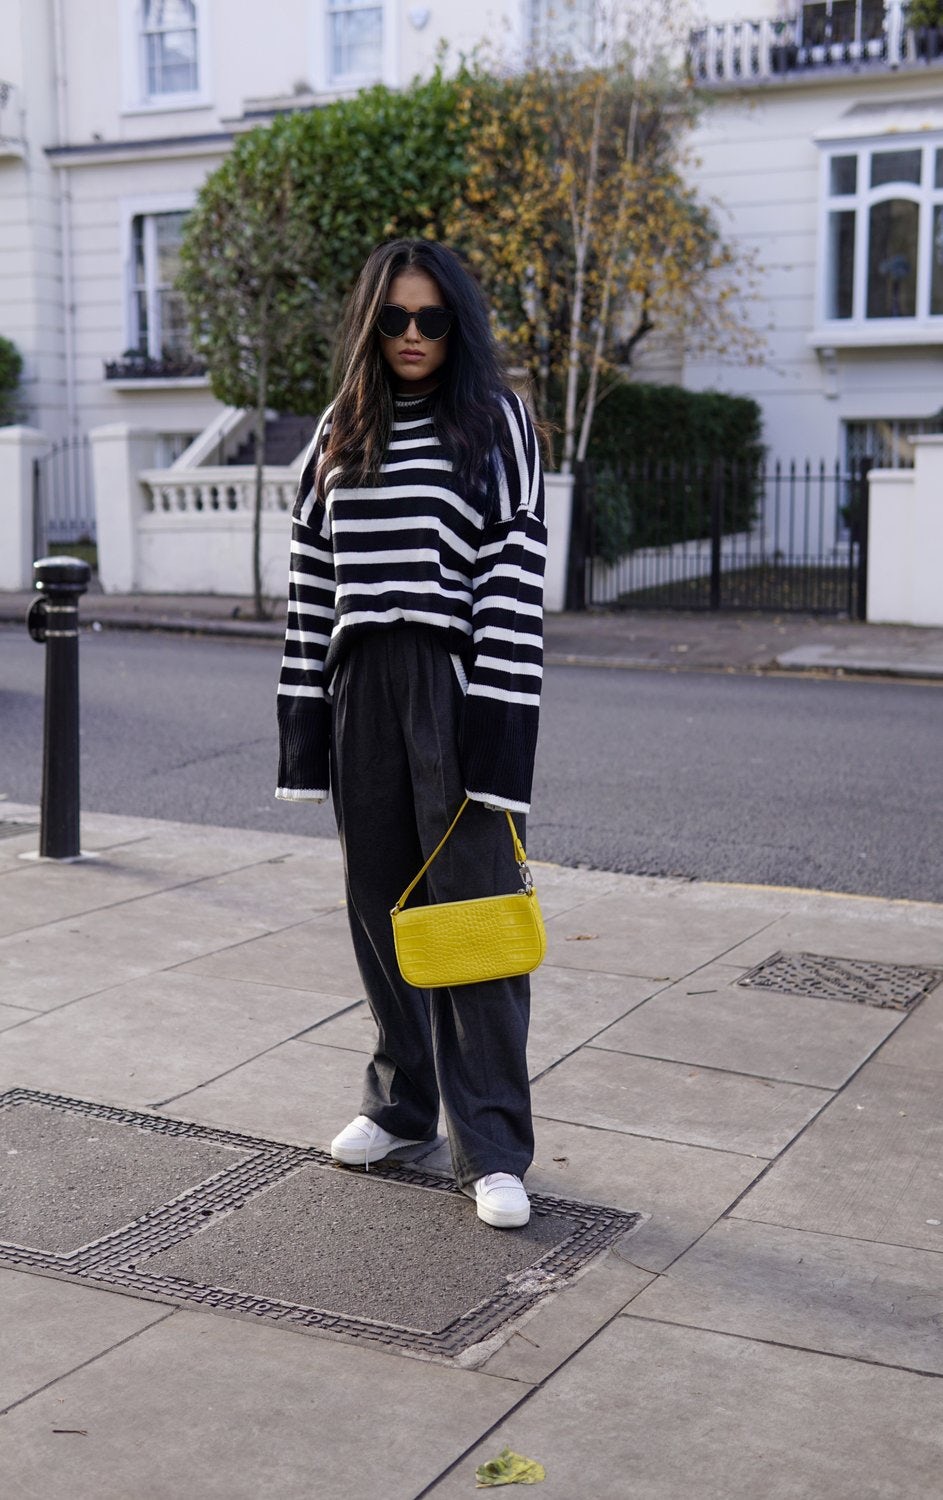 Sachini standing on a sidewalk wearing an oversized Chicwish striped jumper and trousers with a yellow bag